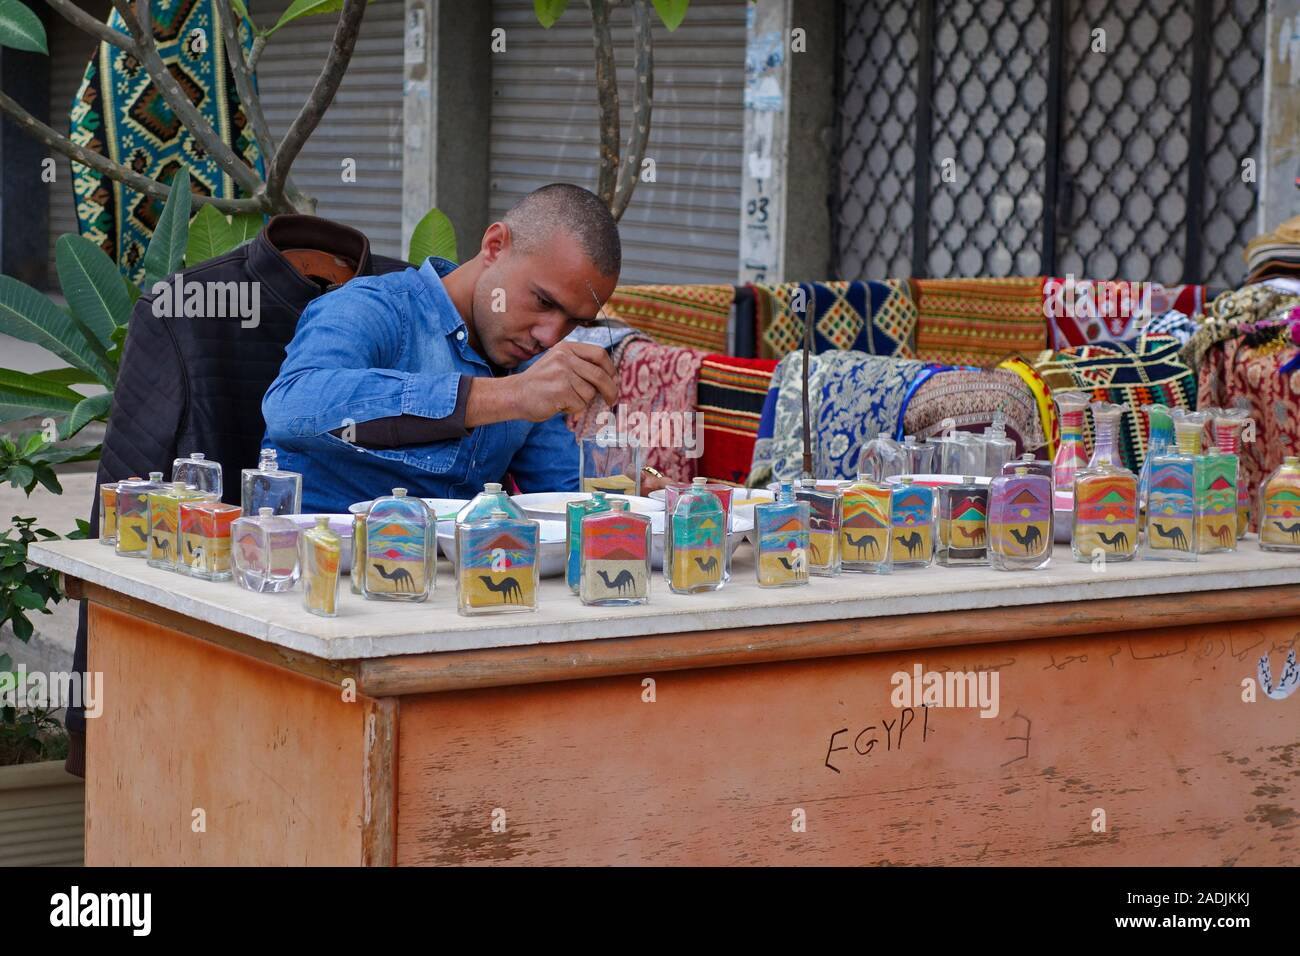 An Egyptian man making coloured sand sculptures in glass bottles or jars as souvenirs at Luxor, Egypt, Africa Stock Photo